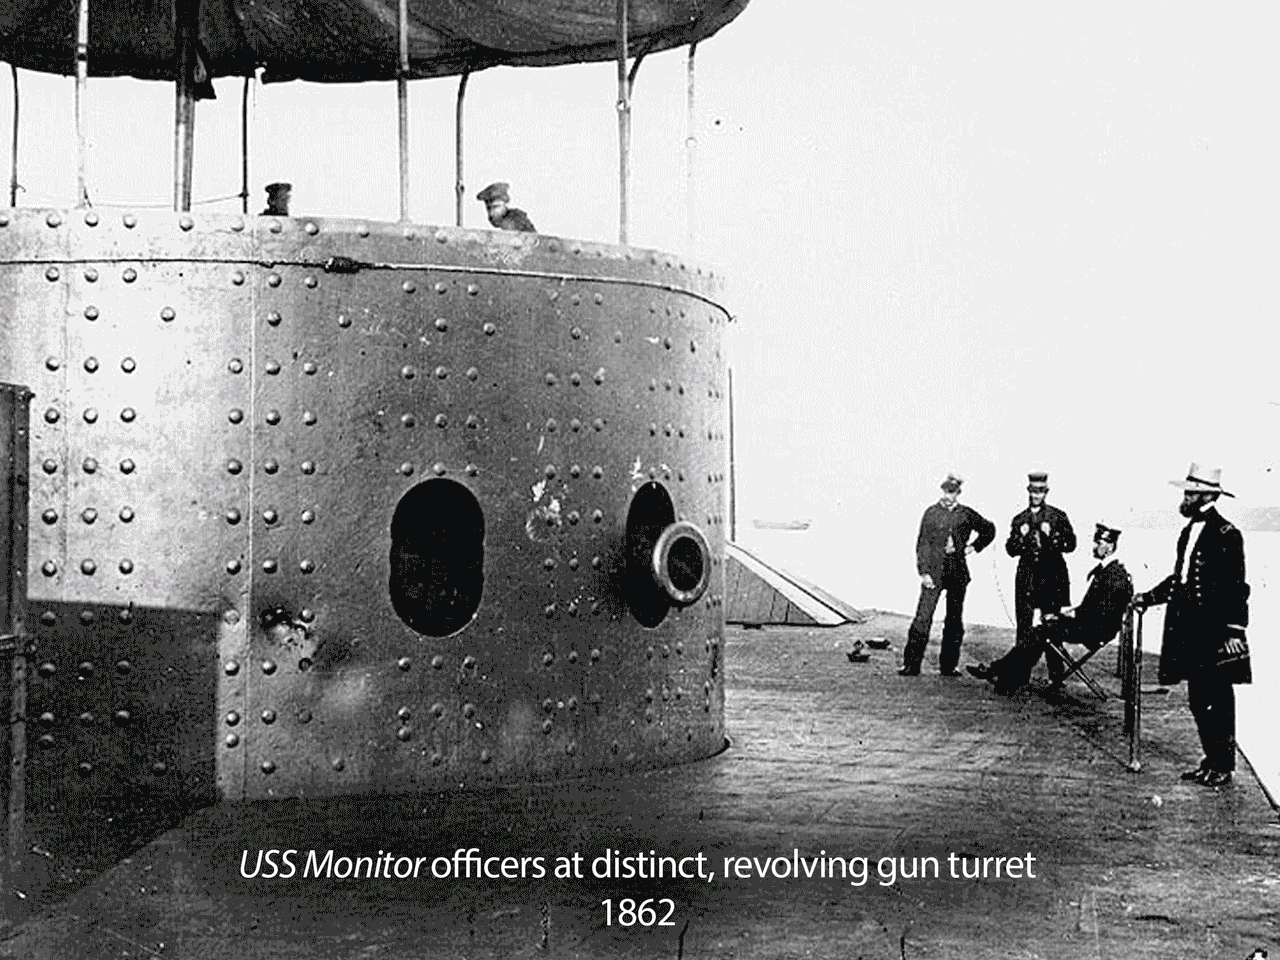 Clocking in at 120 tons and pulled from the depths of Monitor National Marine Sanctuary in 2002, the USS Monitor's turret is the largest metal marine artifact ever recovered from the ocean.